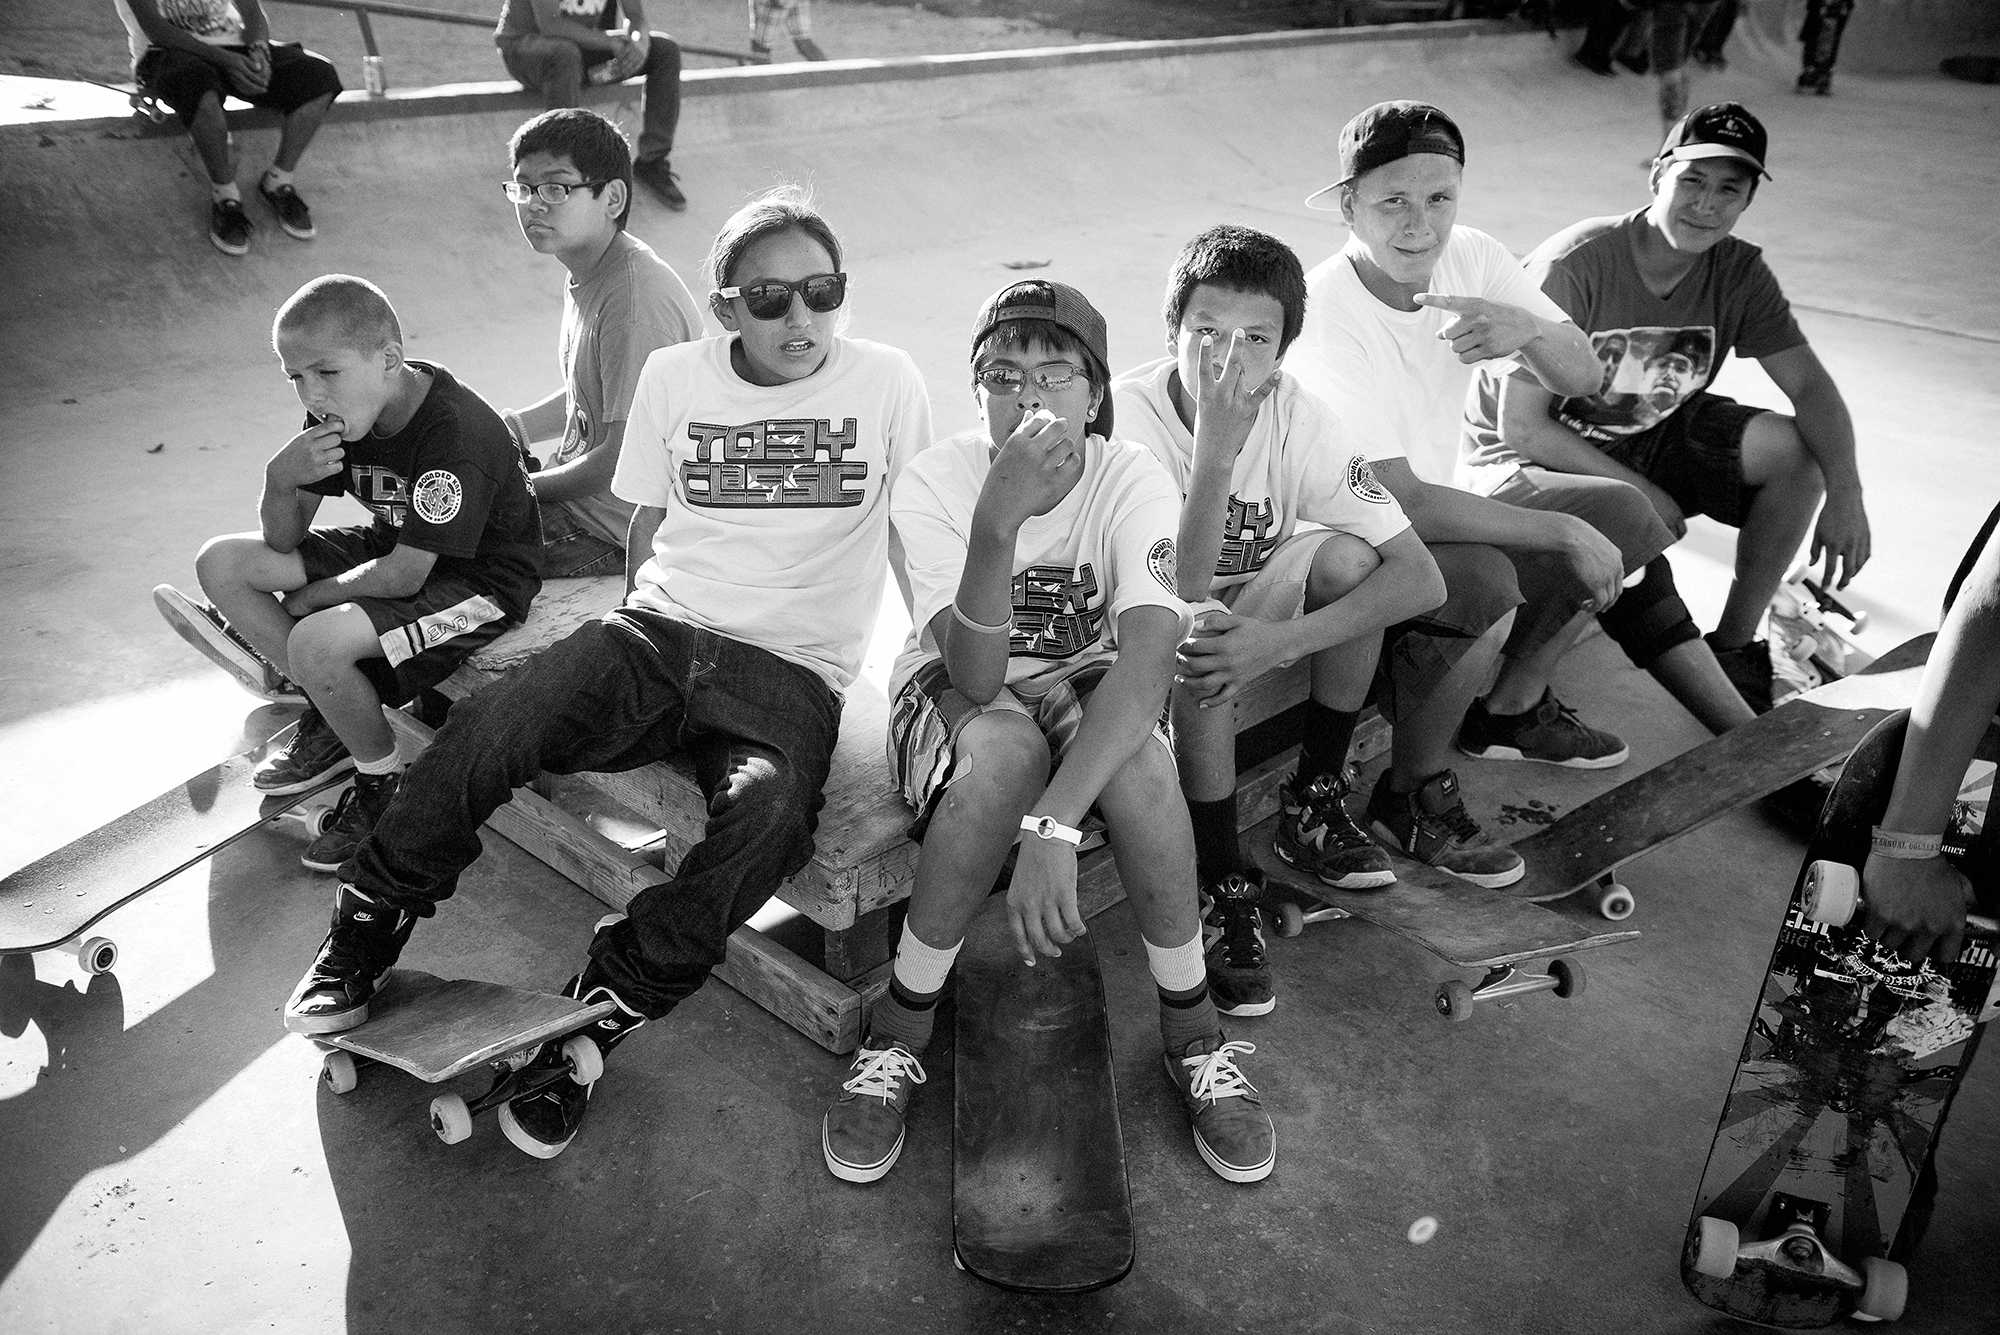 "My favorite memory was just working with the very young kids that just started skateboarding, " says photographer Atiba Jefferson, "It just lights up their face, lights up their lives and it's great to see that just a little toy can bring so much happiness when they're surrounded by so much craziness.'